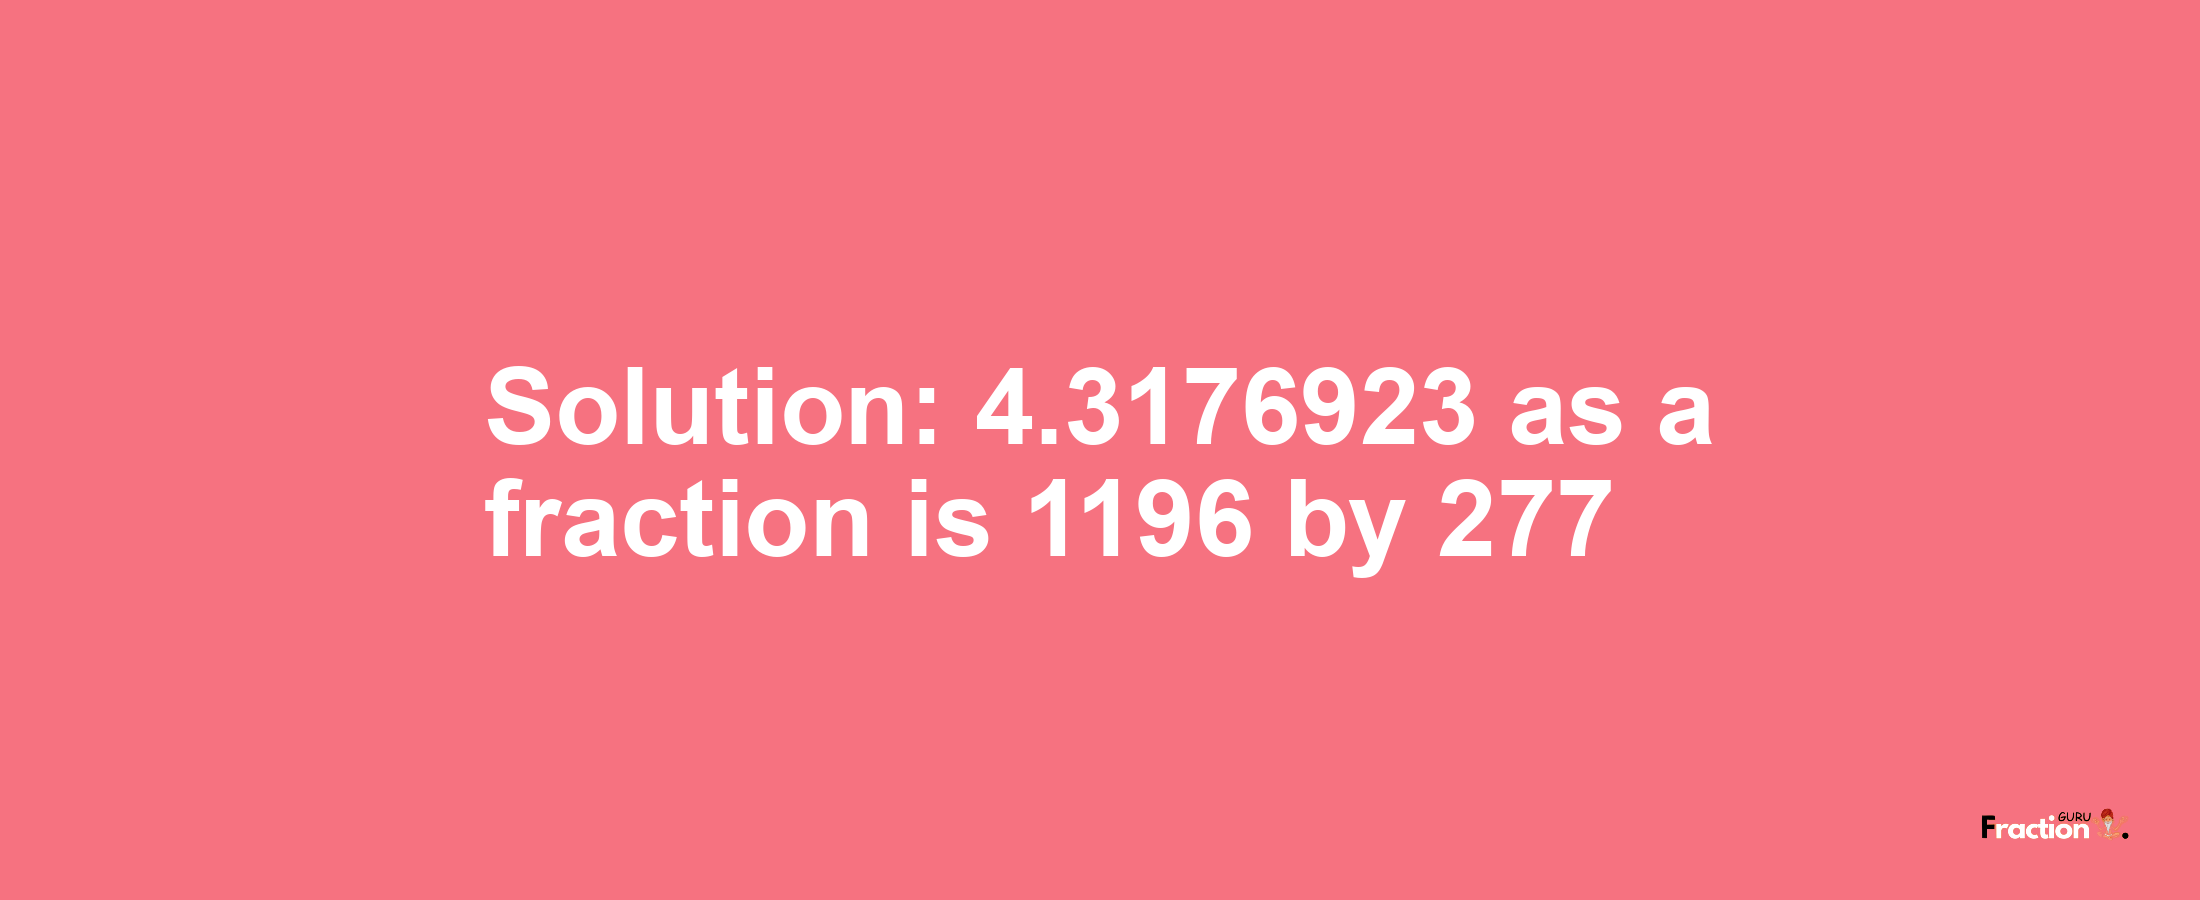 Solution:4.3176923 as a fraction is 1196/277